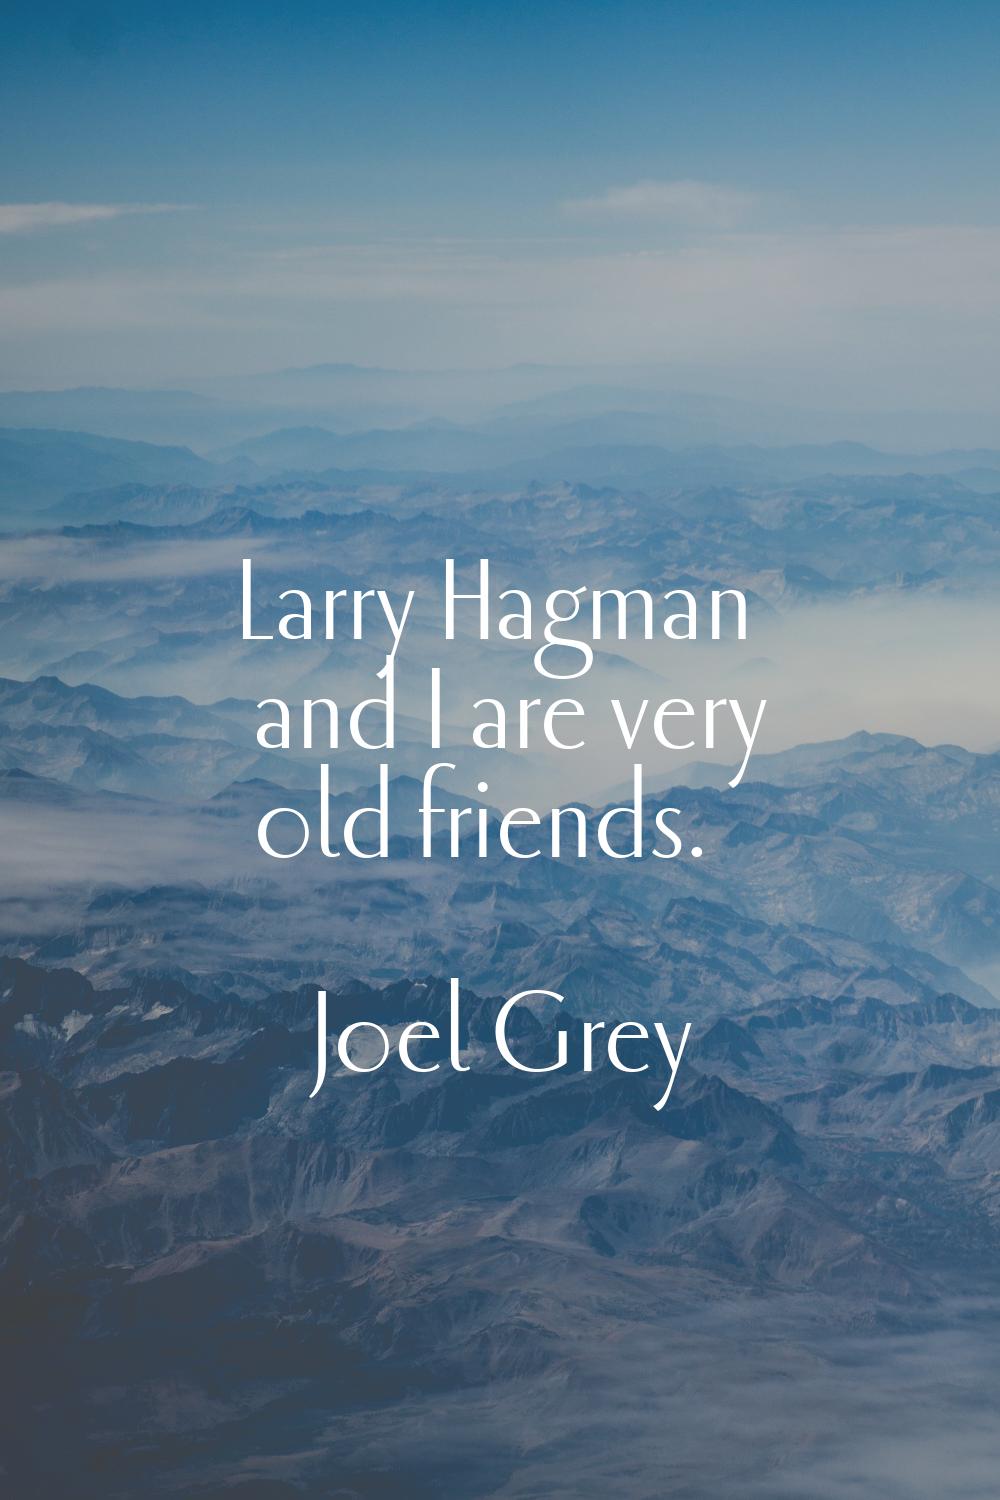 Larry Hagman and I are very old friends.